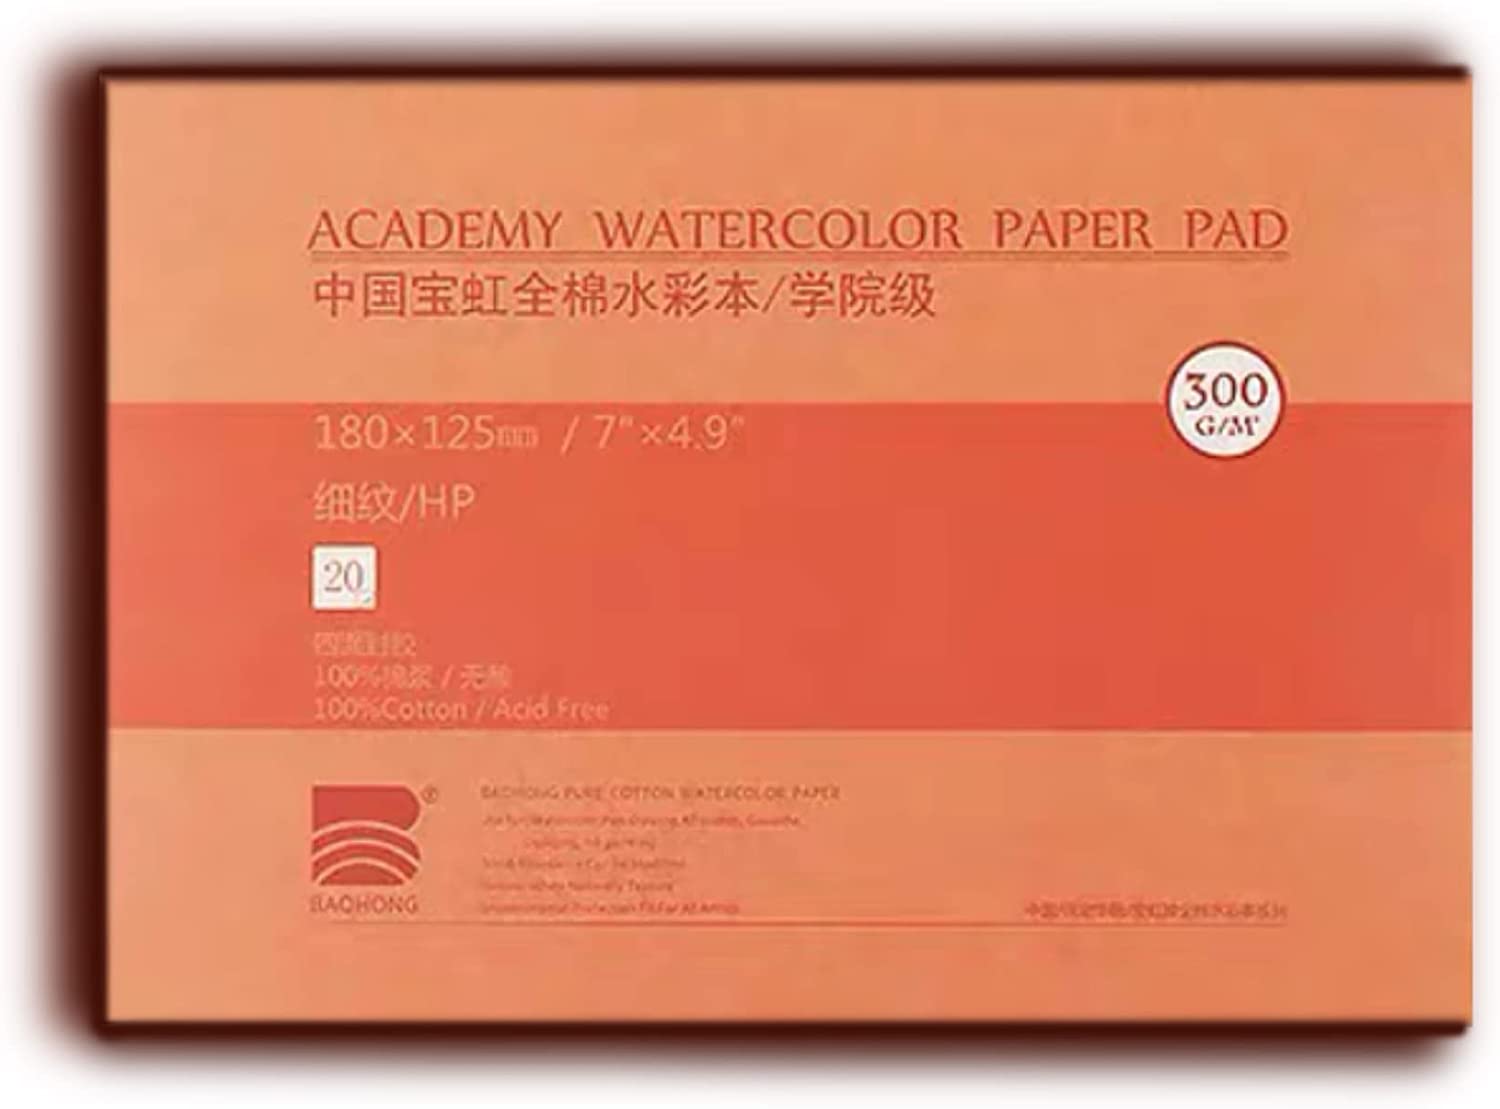 BAOHONG Academy Watercolor Paper Roll,100% Cotton, Acid-Free